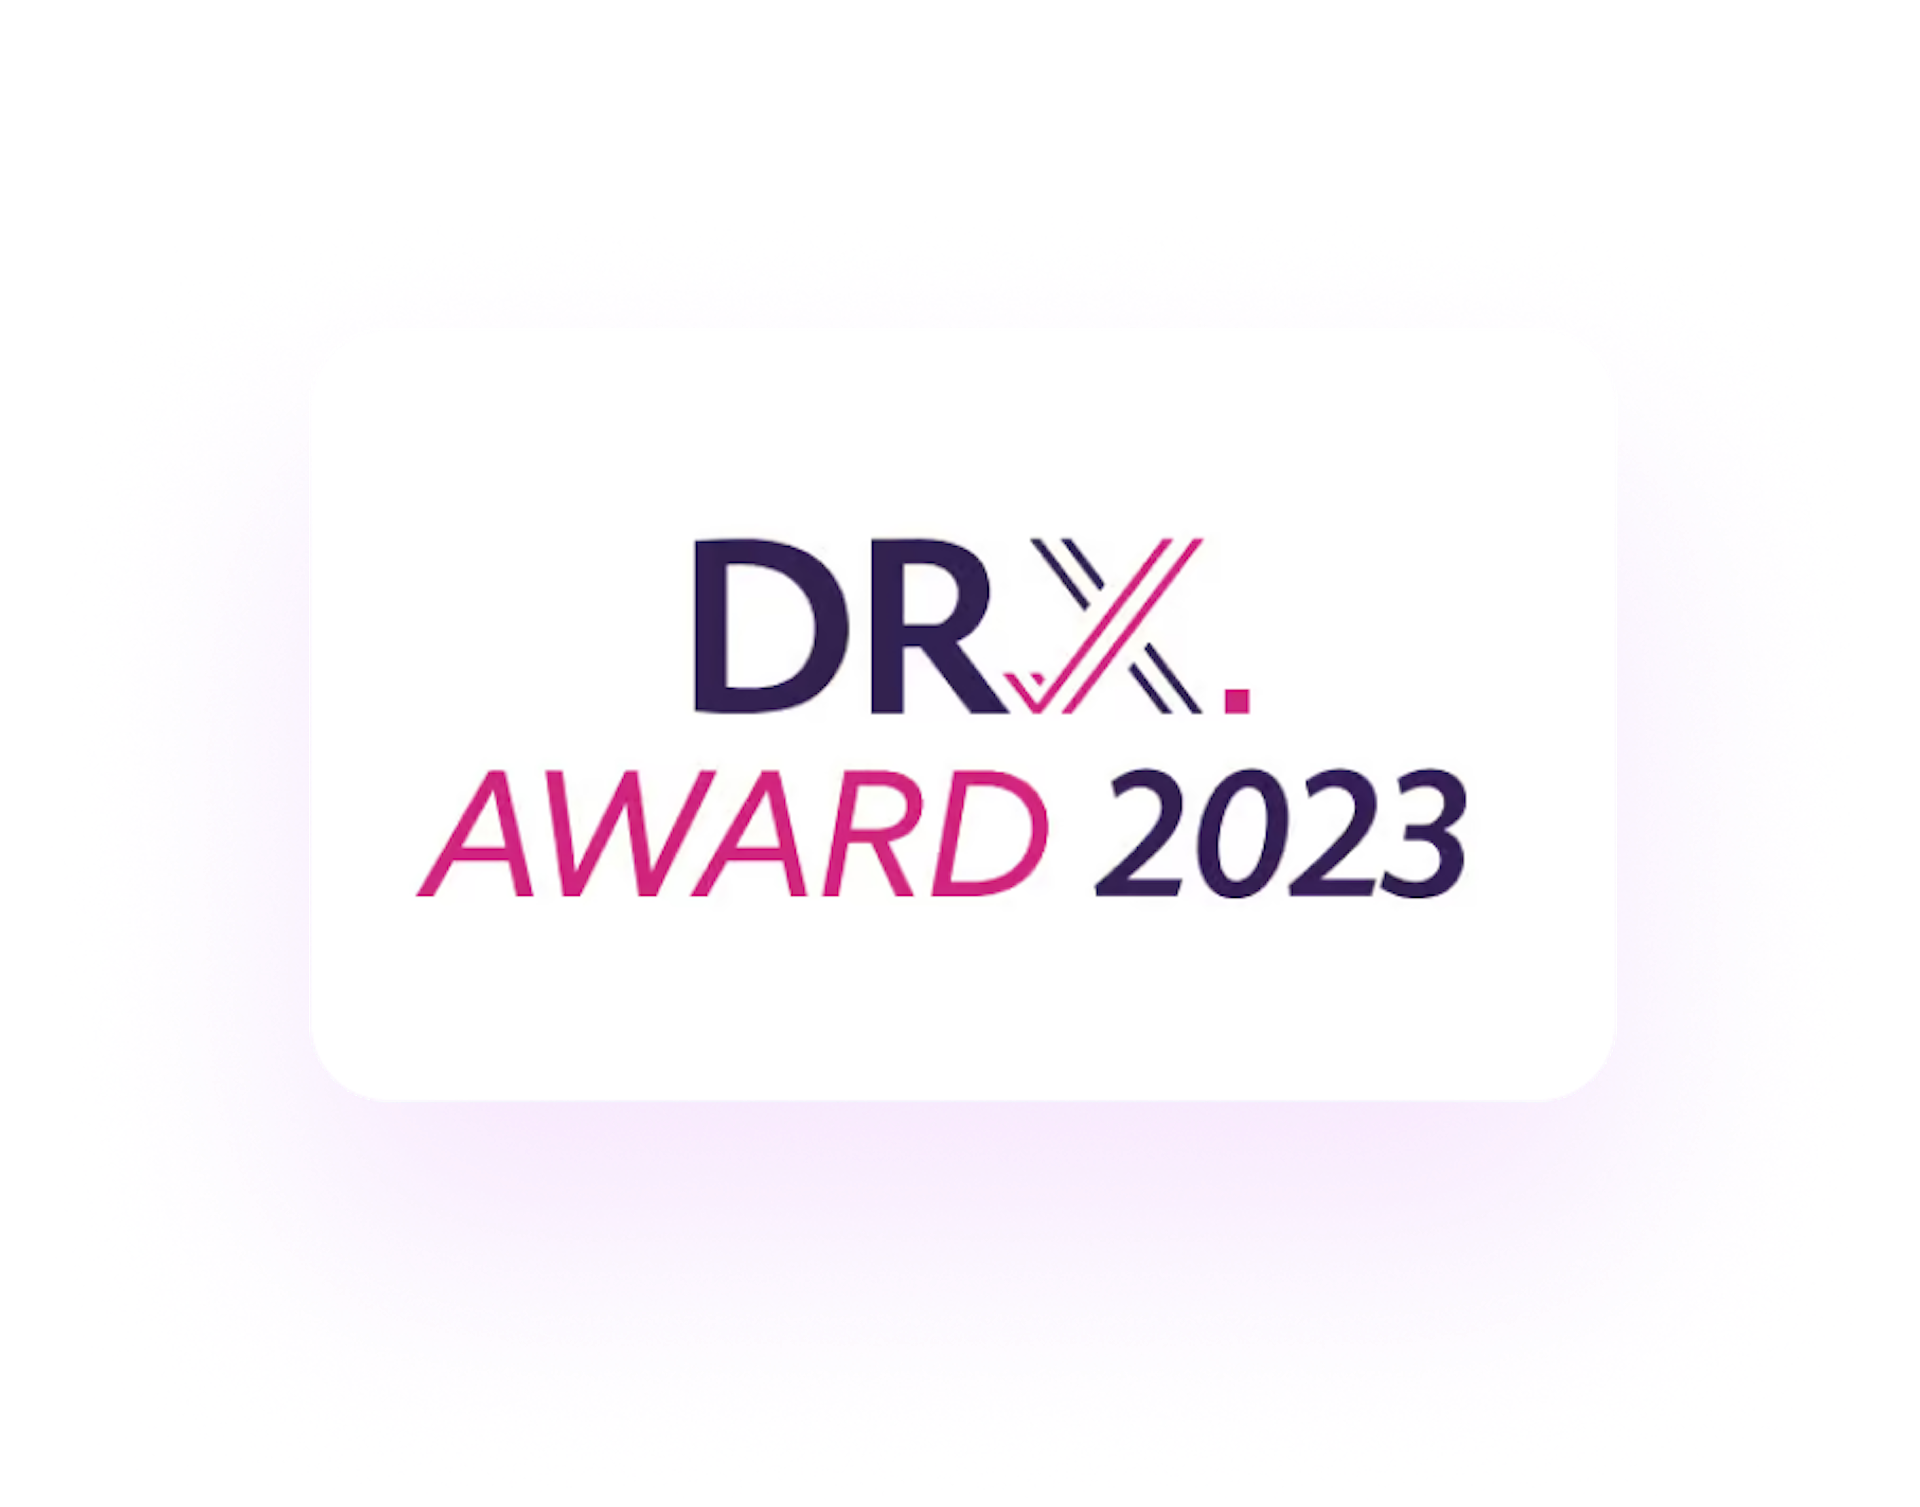 The badge for the DRX award of 2023